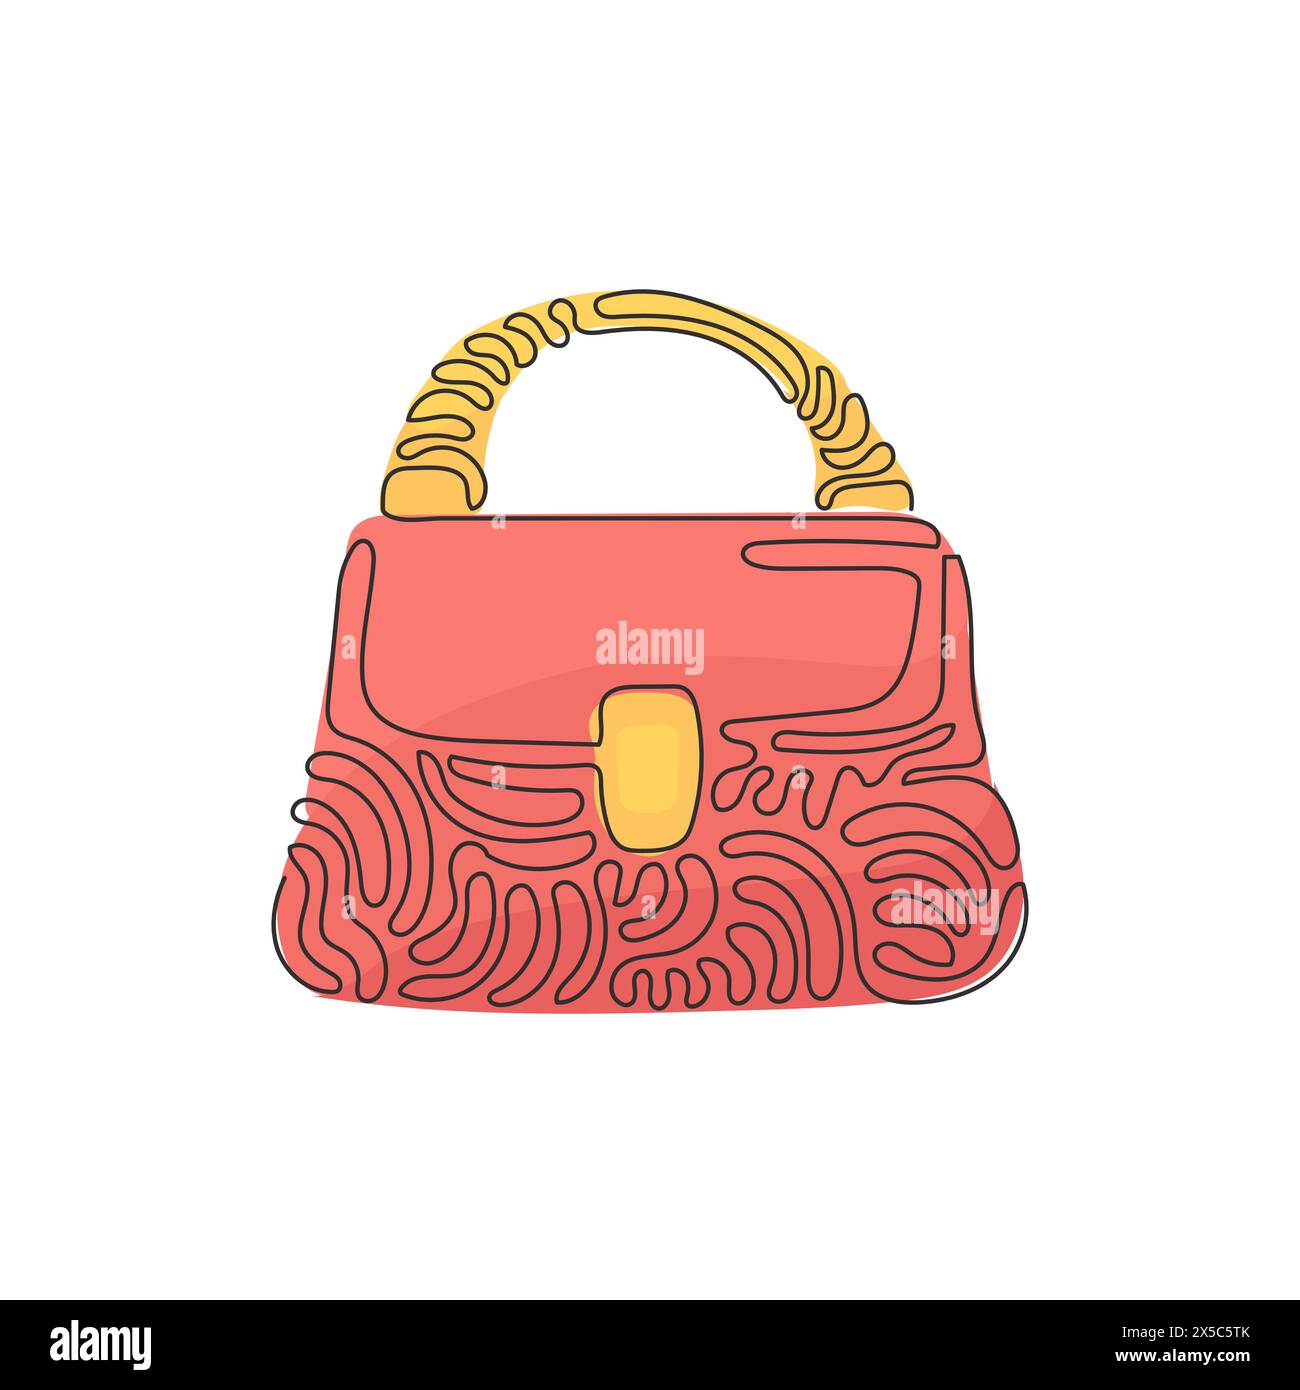 Single one line drawing women handbags collection of fashionable items. Bags with zippers, pockets, handles and adjustable shoulder straps lace. Swirl Stock Vector